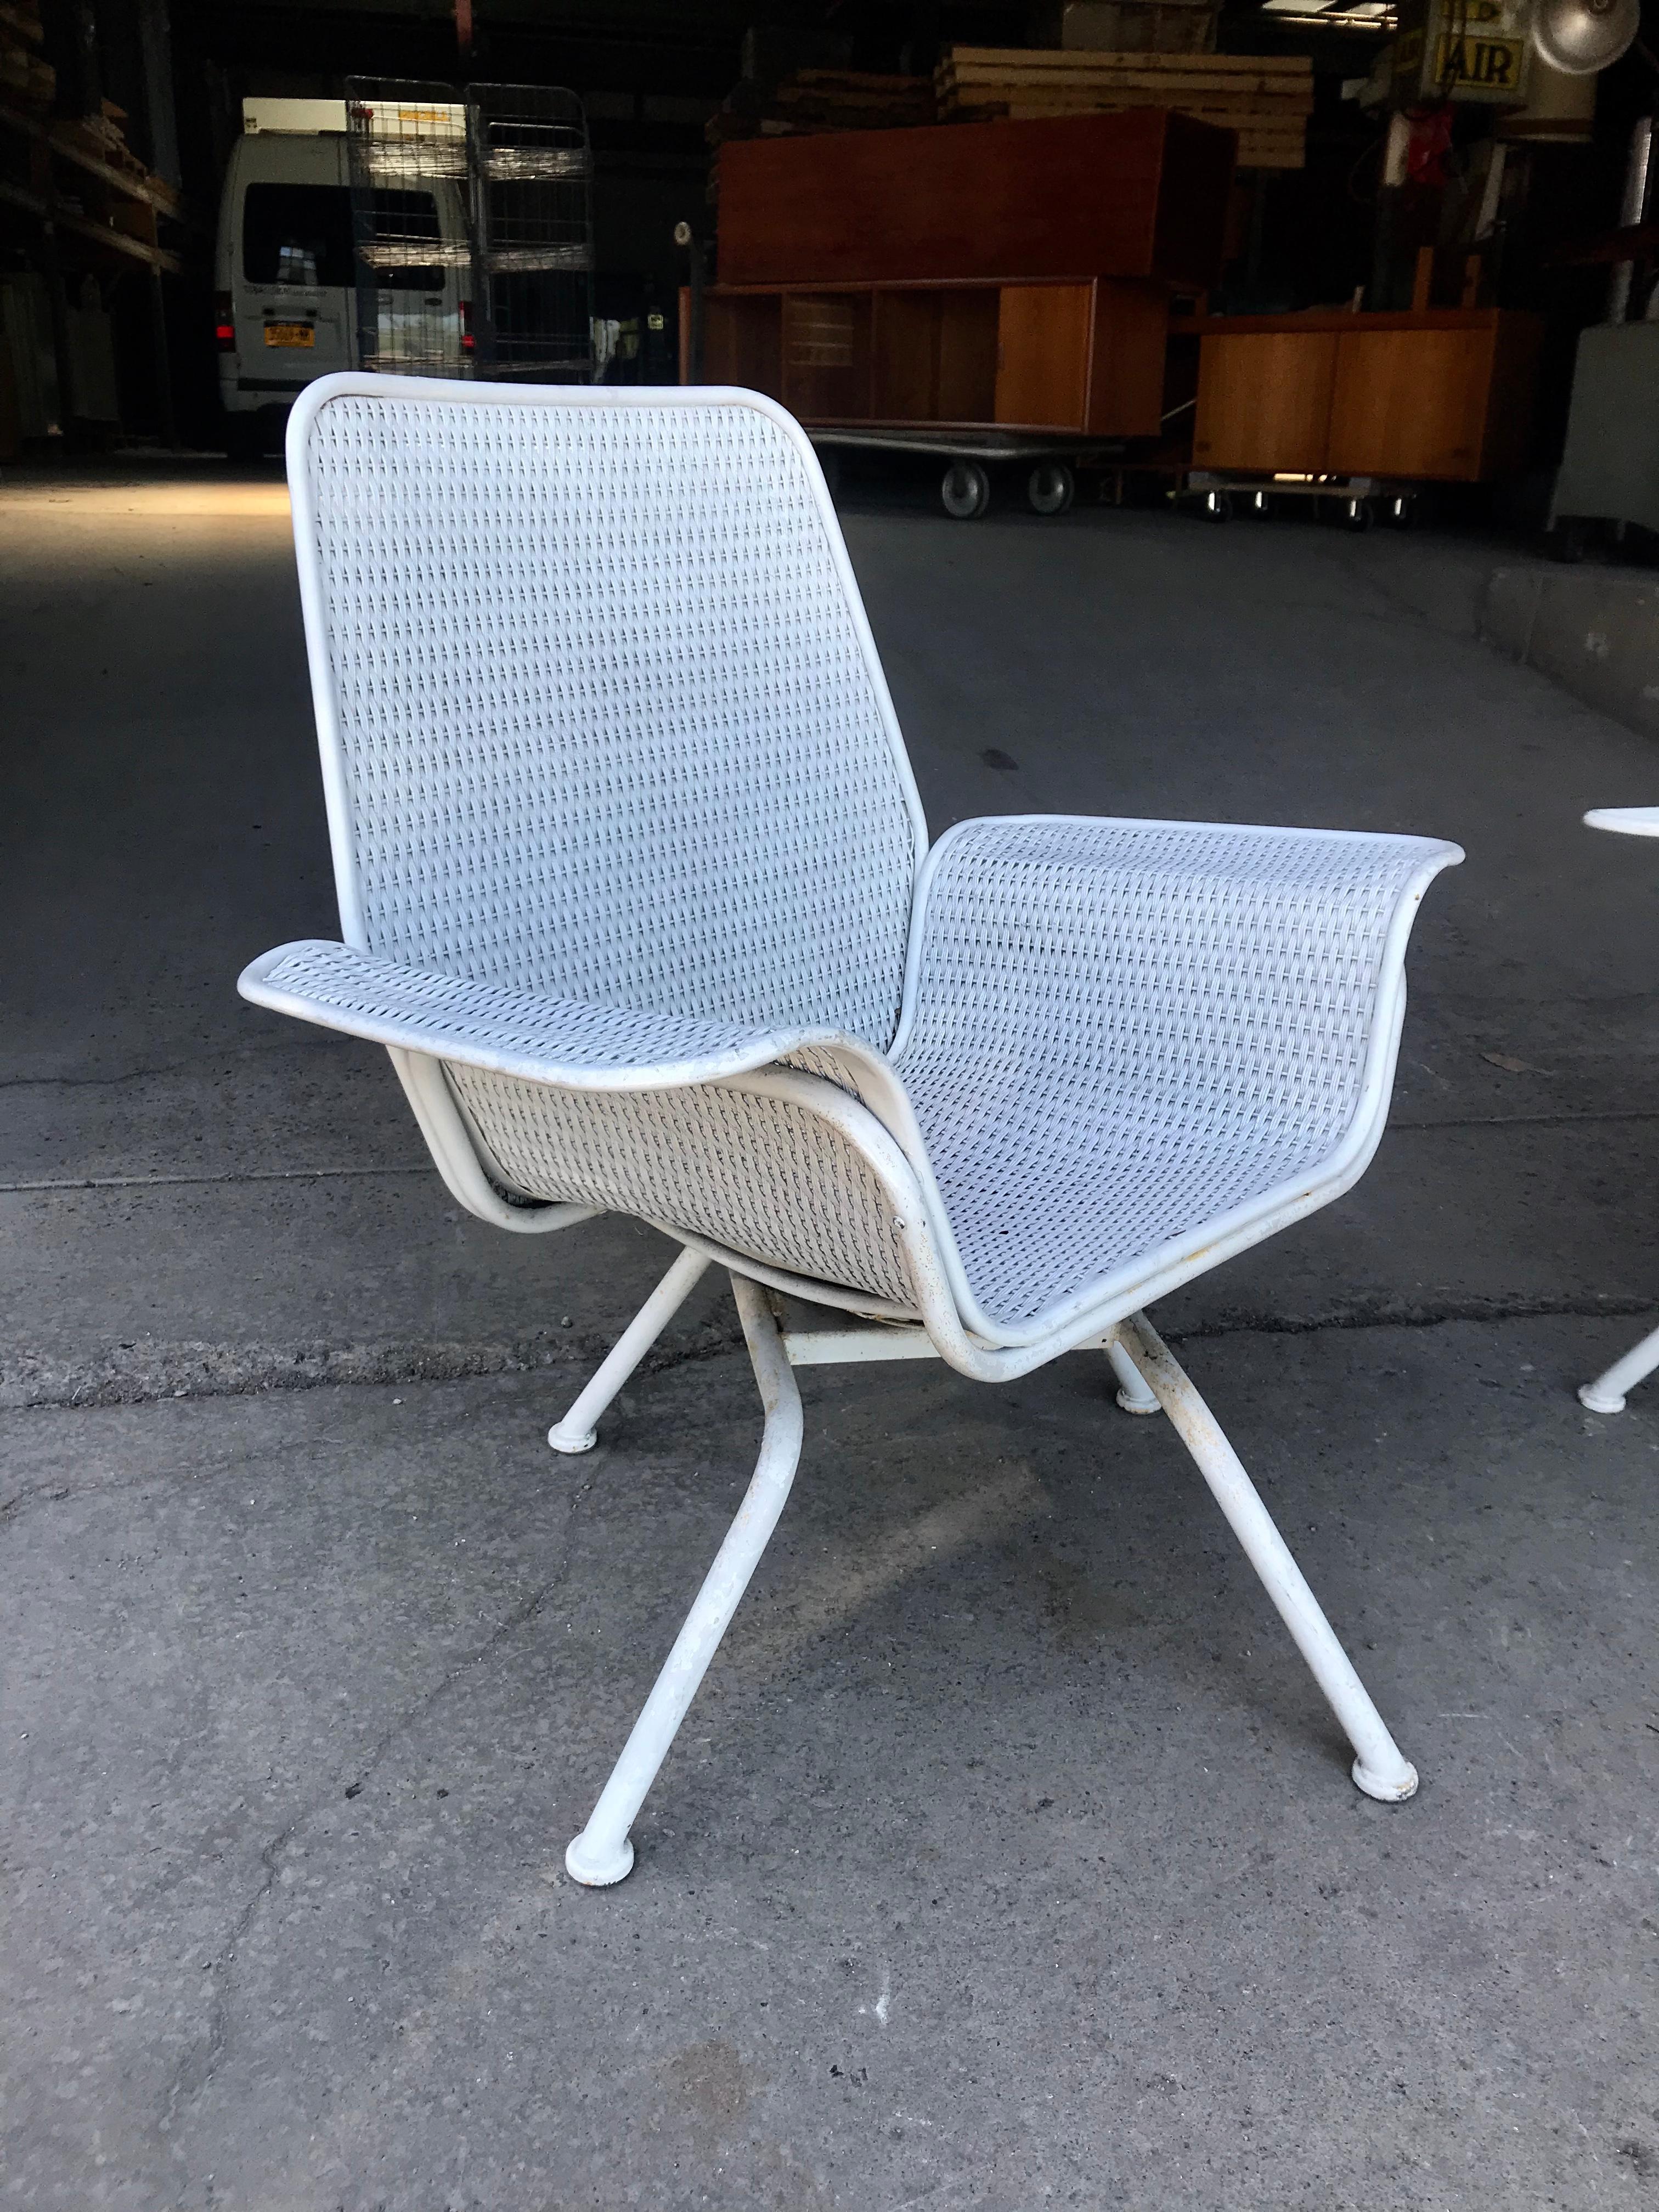 Pair of classic Mid-Century Modern swivel wicker and metal outdoor lounge chairs. Amazing design, reminiscent of George Nelsons 